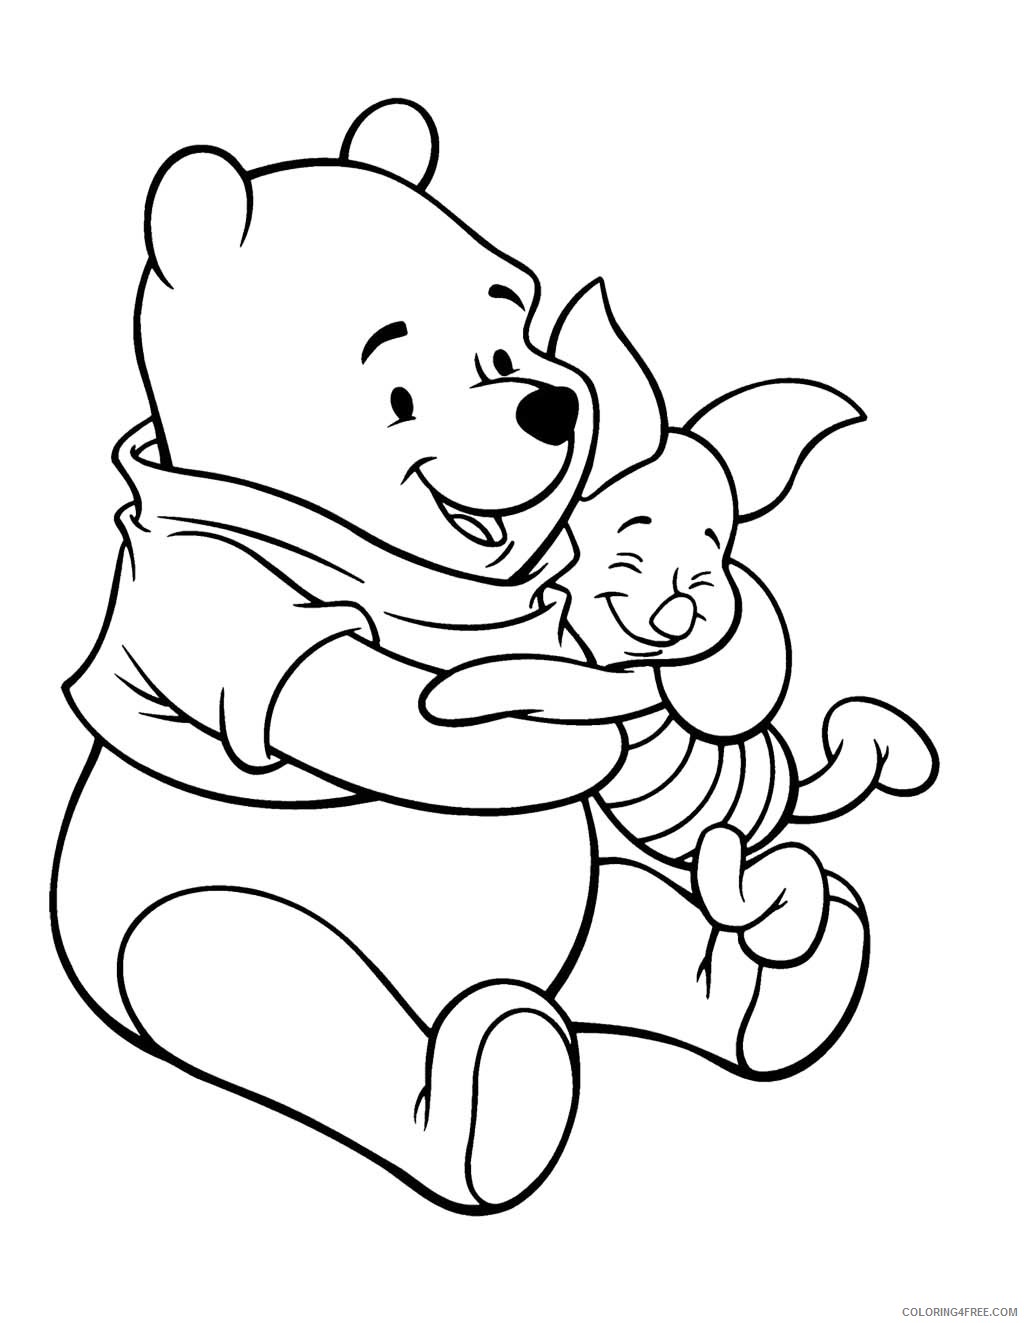 Winnie the Pooh Coloring Pages Cartoons Winnie the Pooh and Piglet Printable 2020 7062 Coloring4free